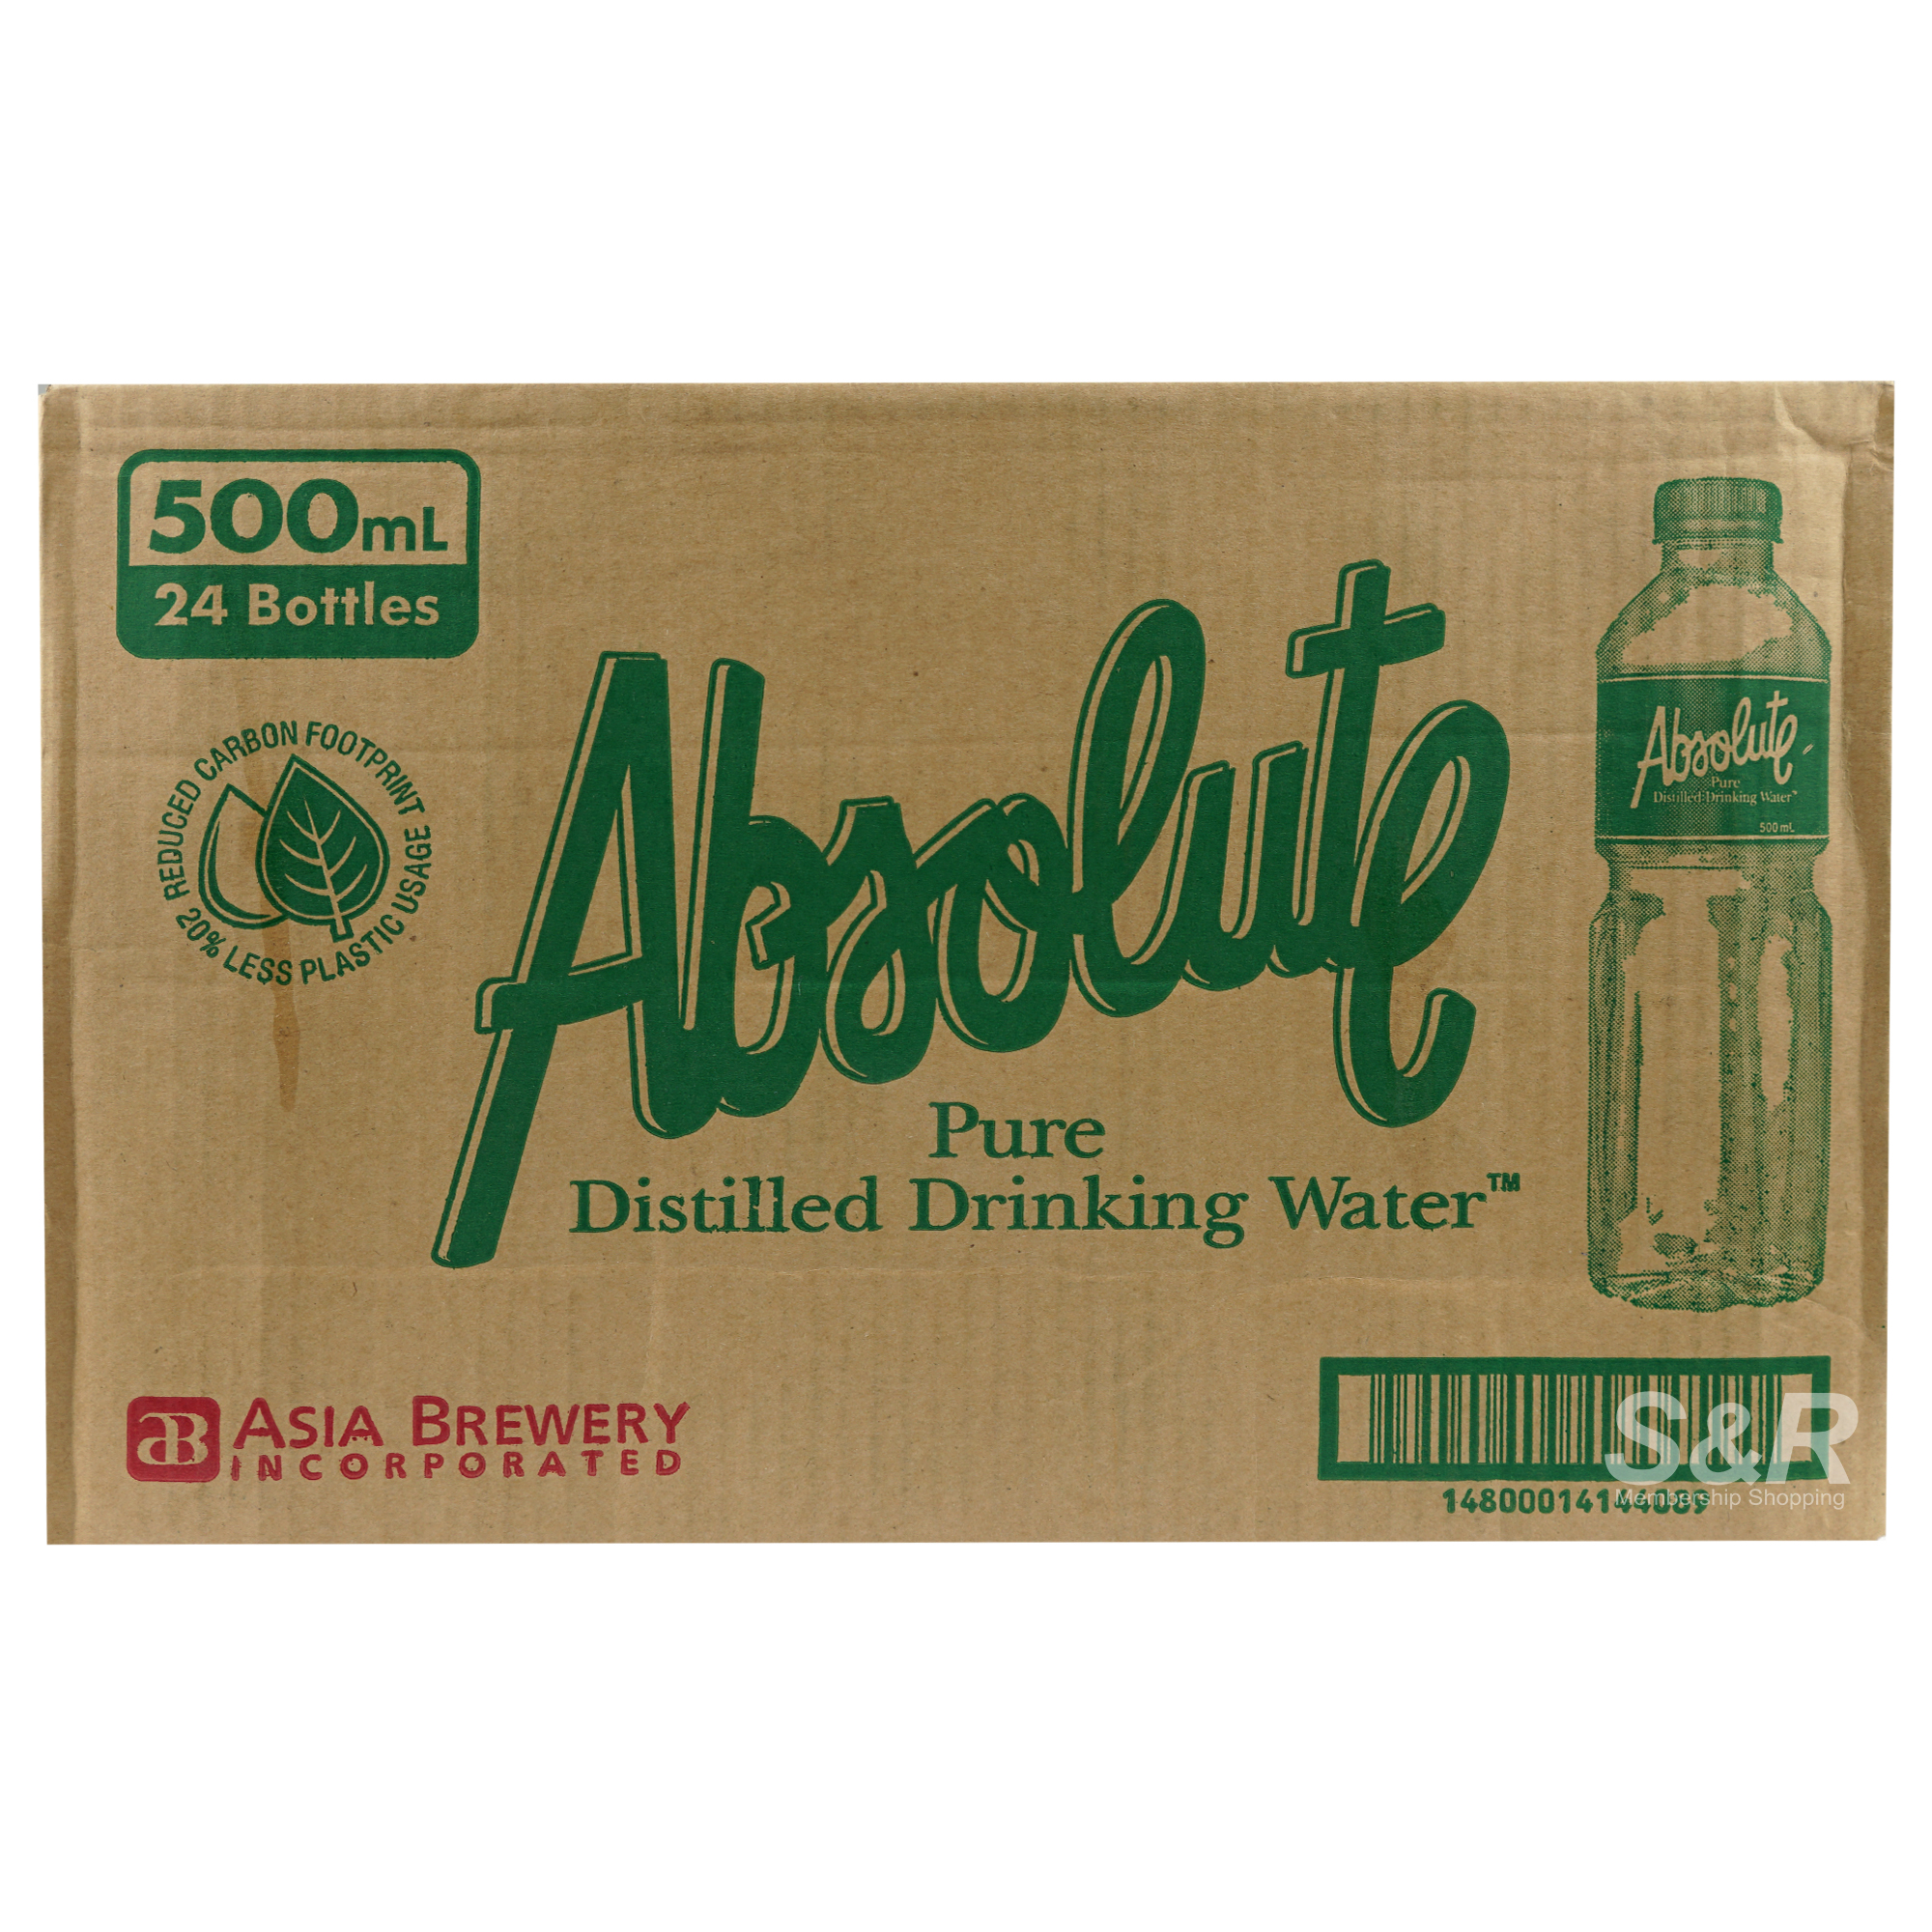 Absolute Pure Distilled Drinking Water 24 bottles